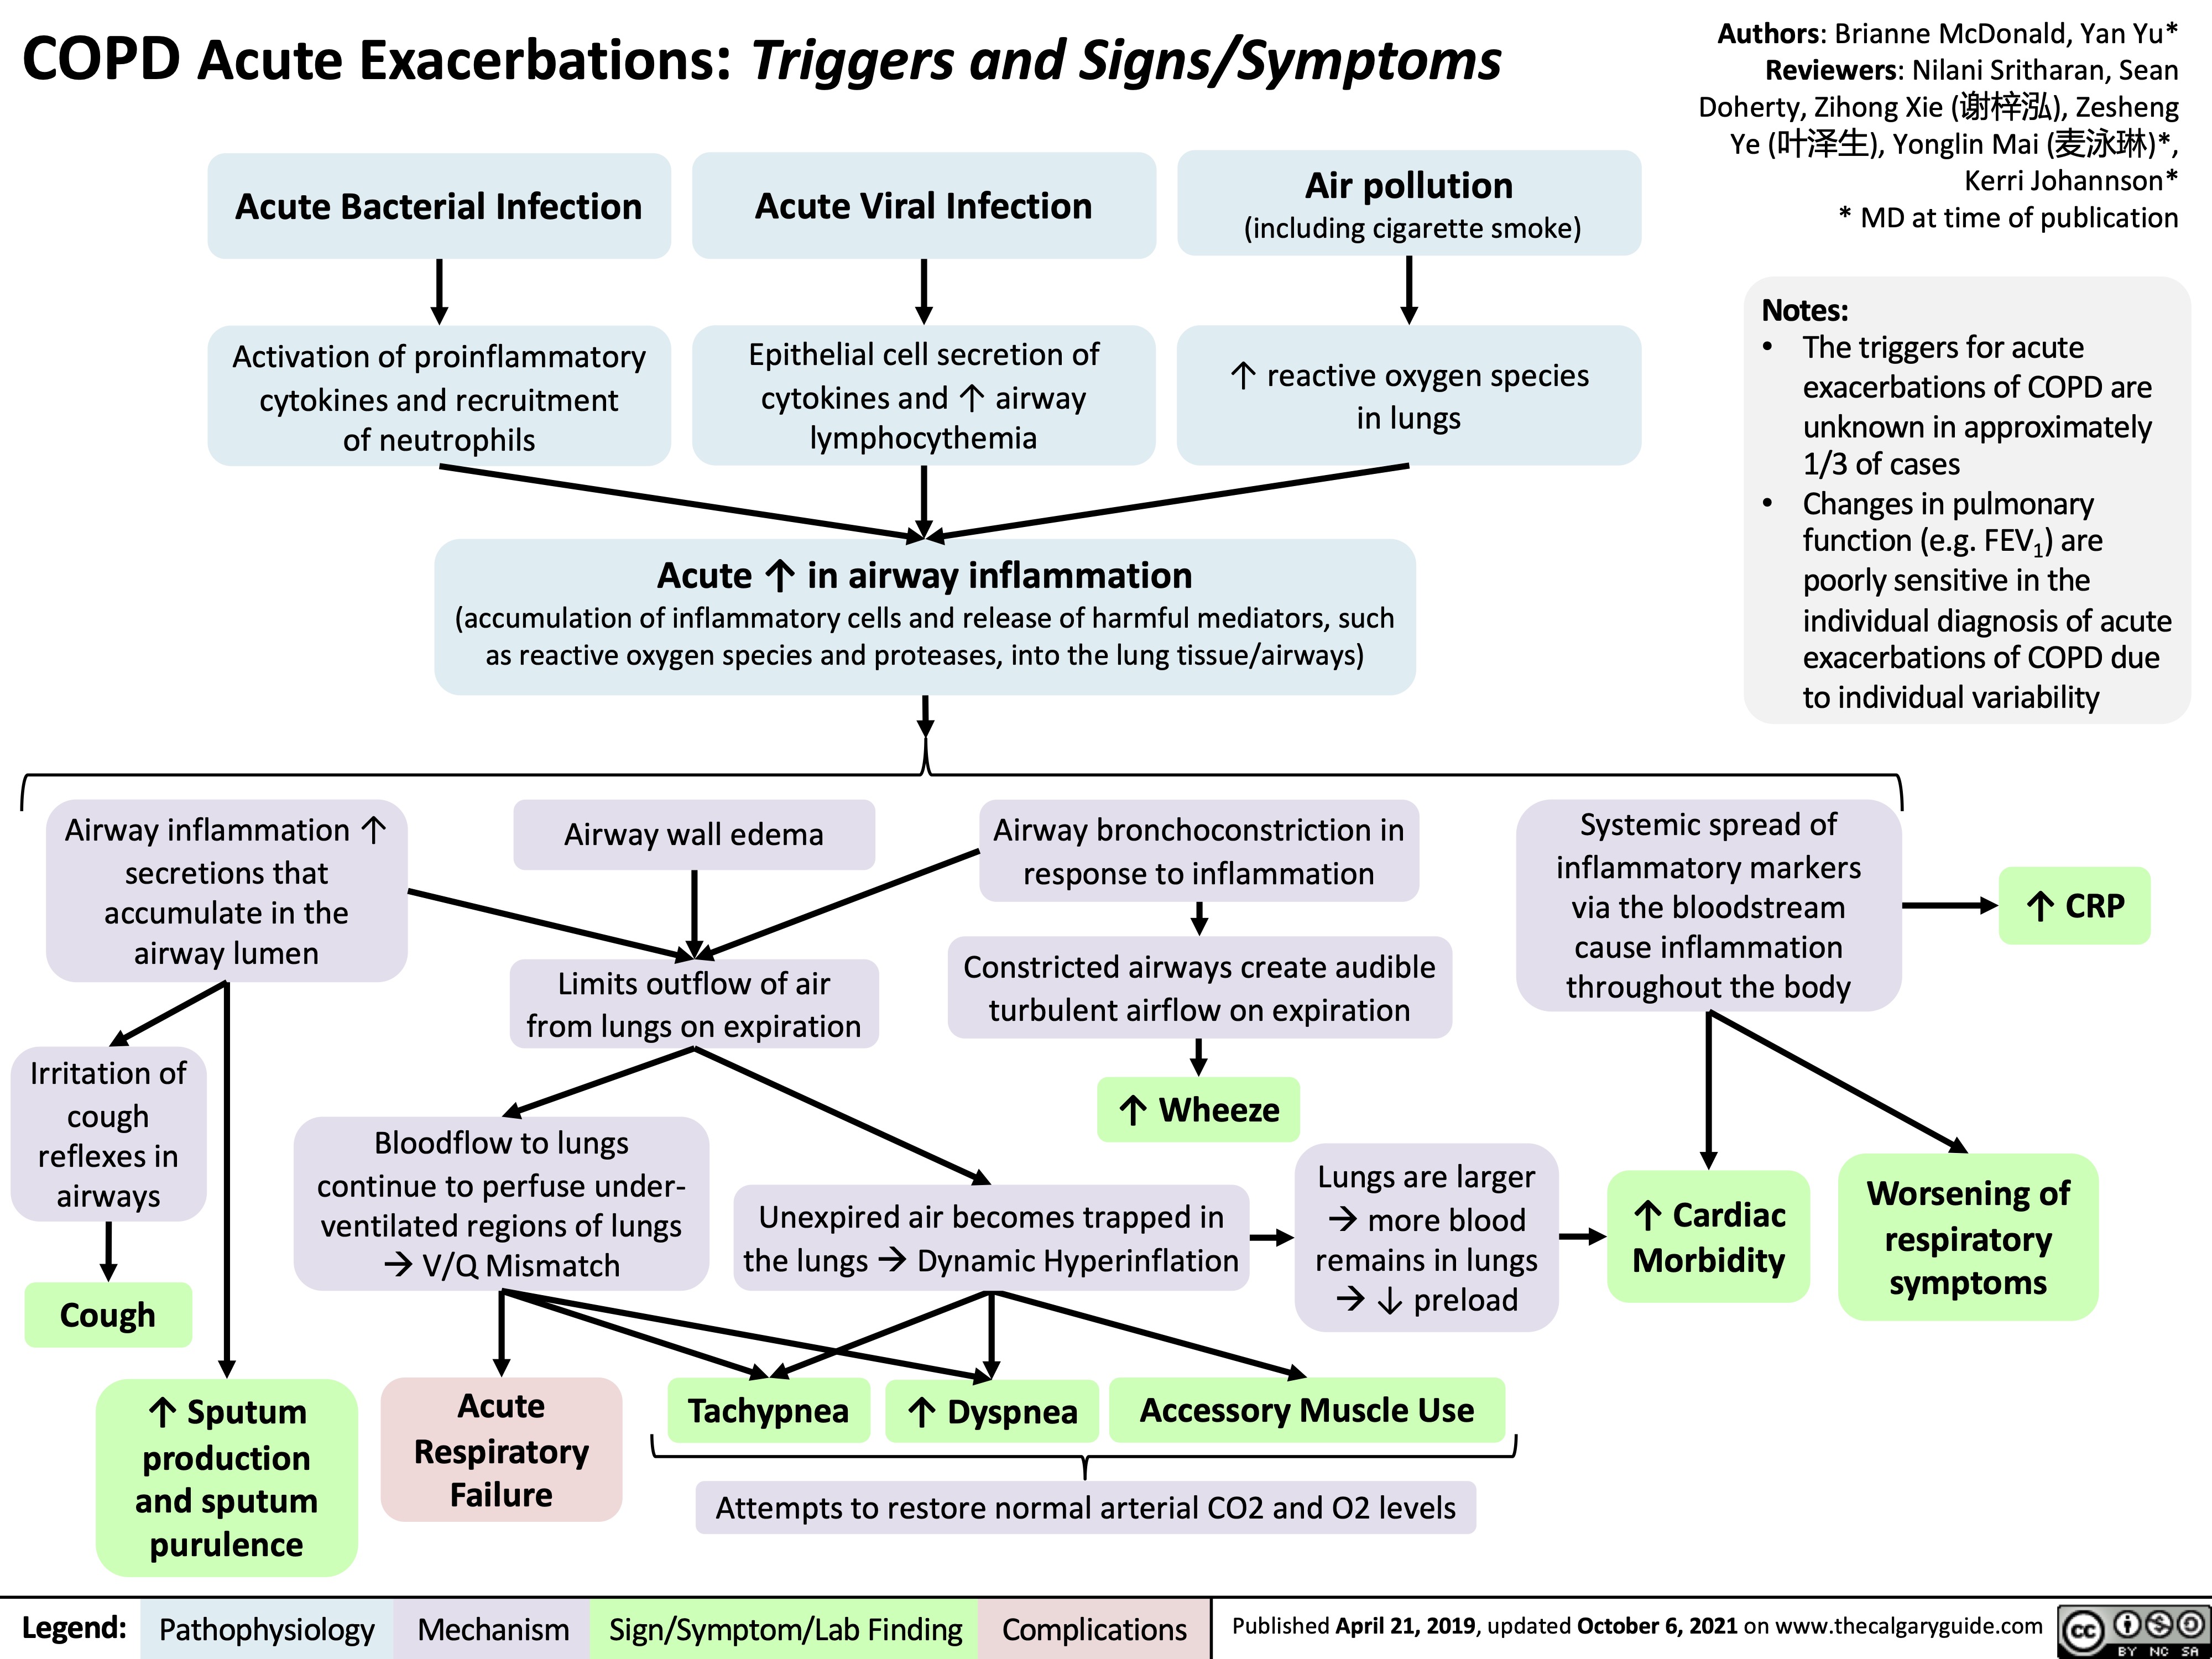 COPD Acute Exacerbations: Triggers and Signs/Symptoms
Authors: Brianne McDonald, Yan Yu* Reviewers: Nilani Sritharan, Sean Doherty, Zihong Xie (谢梓泓), Zesheng Ye (叶泽生), Yonglin Mai (麦泳琳)*, Kerri Johannson* * MD at time of publication
Notes:
• The triggers for acute exacerbations of COPD are unknown in approximately 1/3 of cases
• Changes in pulmonary function (e.g. FEV1) are poorly sensitive in the individual diagnosis of acute exacerbations of COPD due to individual variability
   Acute Bacterial Infection
Activation of proinflammatory cytokines and recruitment of neutrophils
Acute Viral Infection
Epithelial cell secretion of cytokines and ↑ airway lymphocythemia
Acute ↑ in airway inflammation
(accumulation of inflammatory cells and release of harmful mediators, such as reactive oxygen species and proteases, into the lung tissue/airways)
Air pollution
(including cigarette smoke)
↑ reactive oxygen species in lungs
            Airway inflammation ↑ secretions that accumulate in the airway lumen
Airway wall edema
Limits outflow of air from lungs on expiration
Airway bronchoconstriction in response to inflammation
Constricted airways create audible turbulent airflow on expiration
Systemic spread of inflammatory markers via the bloodstream cause inflammation throughout the body
↑ Cardiac Morbidity
↑ CRP
Worsening of respiratory symptoms
           Irritation of cough reflexes in airways
Cough
↑ Sputum production and sputum purulence
↑ Wheeze Unexpired air becomes trapped in
the lungsàDynamic Hyperinflation
  Bloodflow to lungs continue to perfuse under- ventilated regions of lungs àV/Q Mismatch
Lungs are larger àmore blood
remains in lungs à↓ preload
              Acute Respiratory Failure
Tachypnea
↑ Dyspnea
Accessory Muscle Use
  Attempts to restore normal arterial CO2 and O2 levels
 Legend:
 Pathophysiology
 Mechanism
Sign/Symptom/Lab Finding
 Complications
 Published April 21, 2019, updated October 6, 2021 on www.thecalgaryguide.com
  